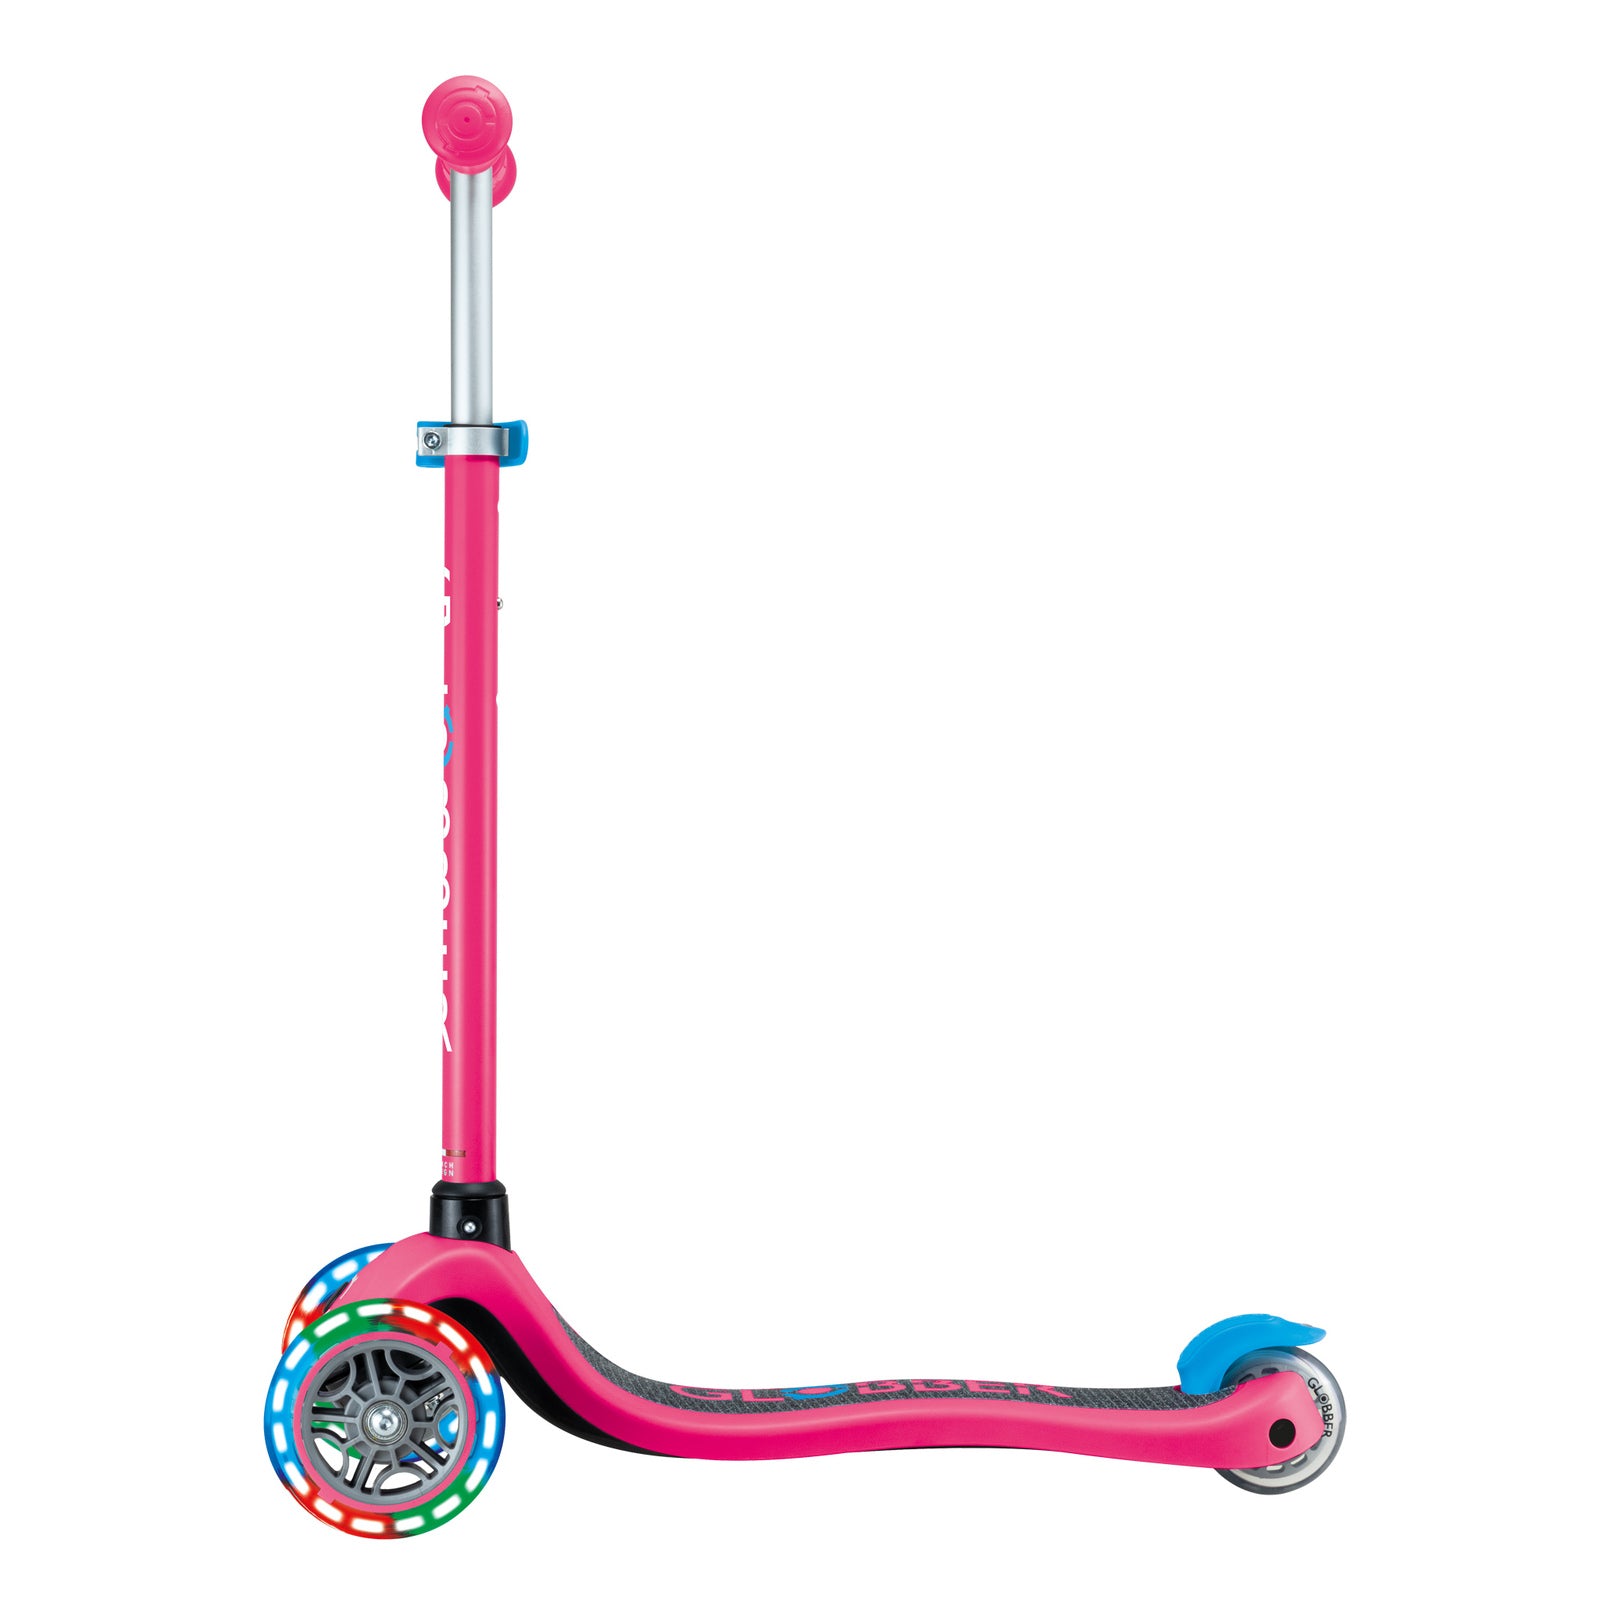 Globber V2 Lights And Grip Tape 3 Wheel Scooter Pink And Blue